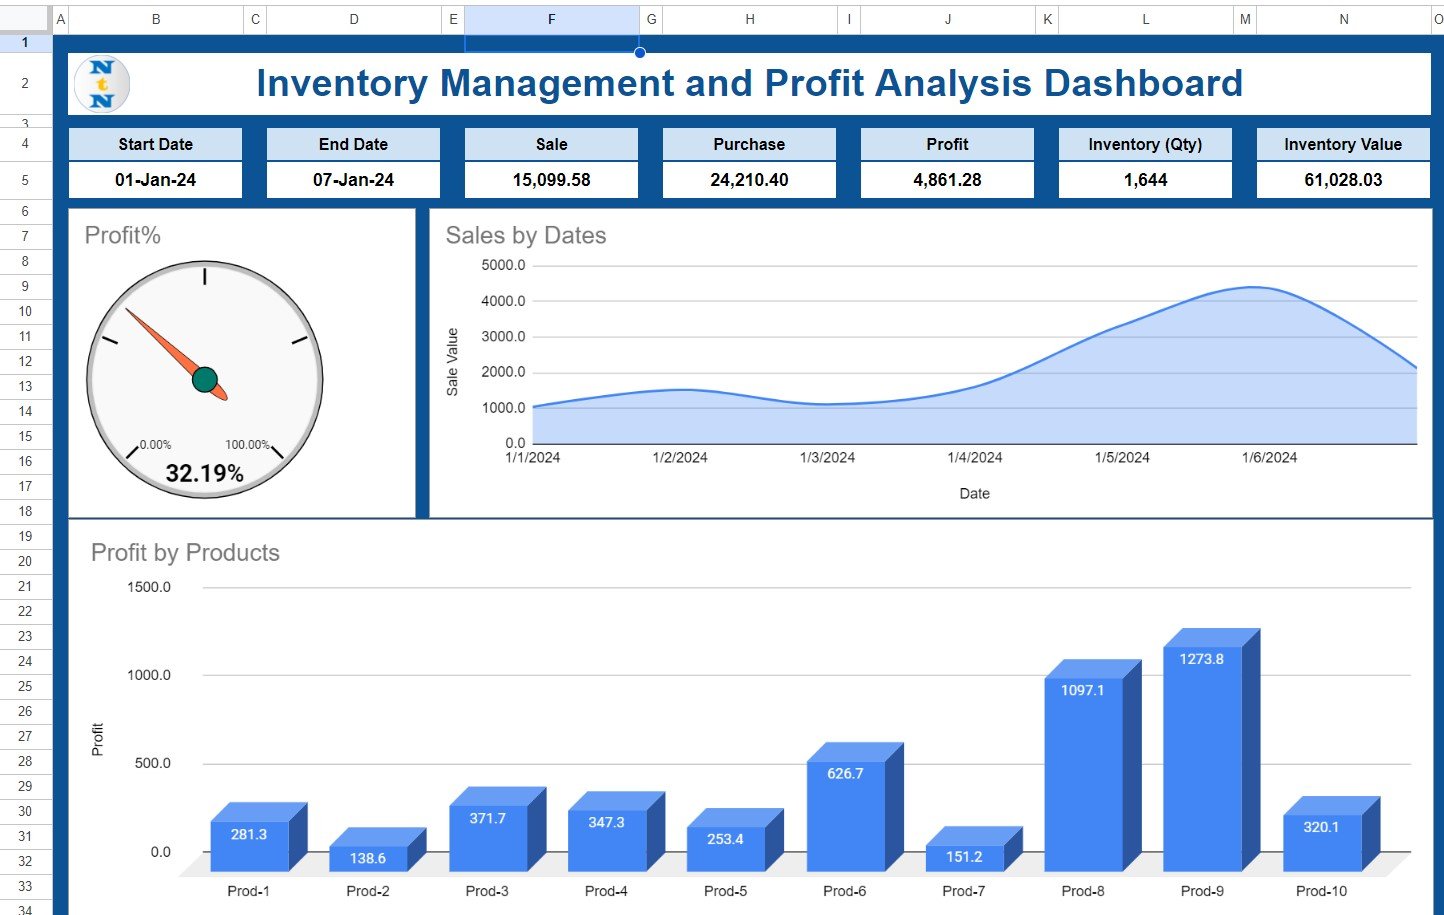 Inventory Management and Profit Analysis Dashboard